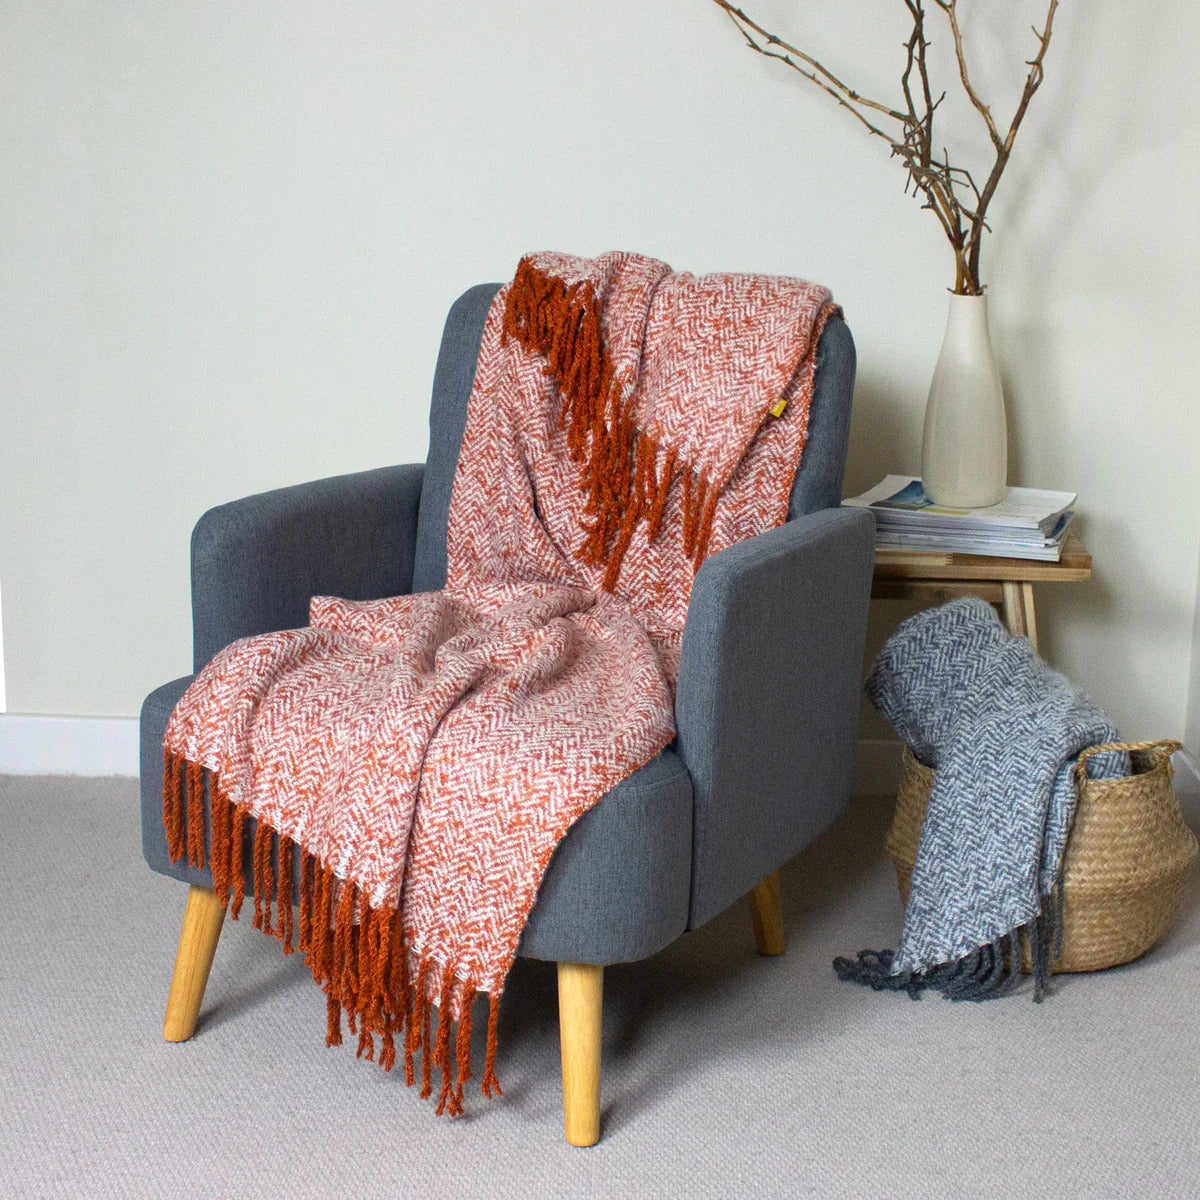 How to Make Your Living Room Cosy for Autumn